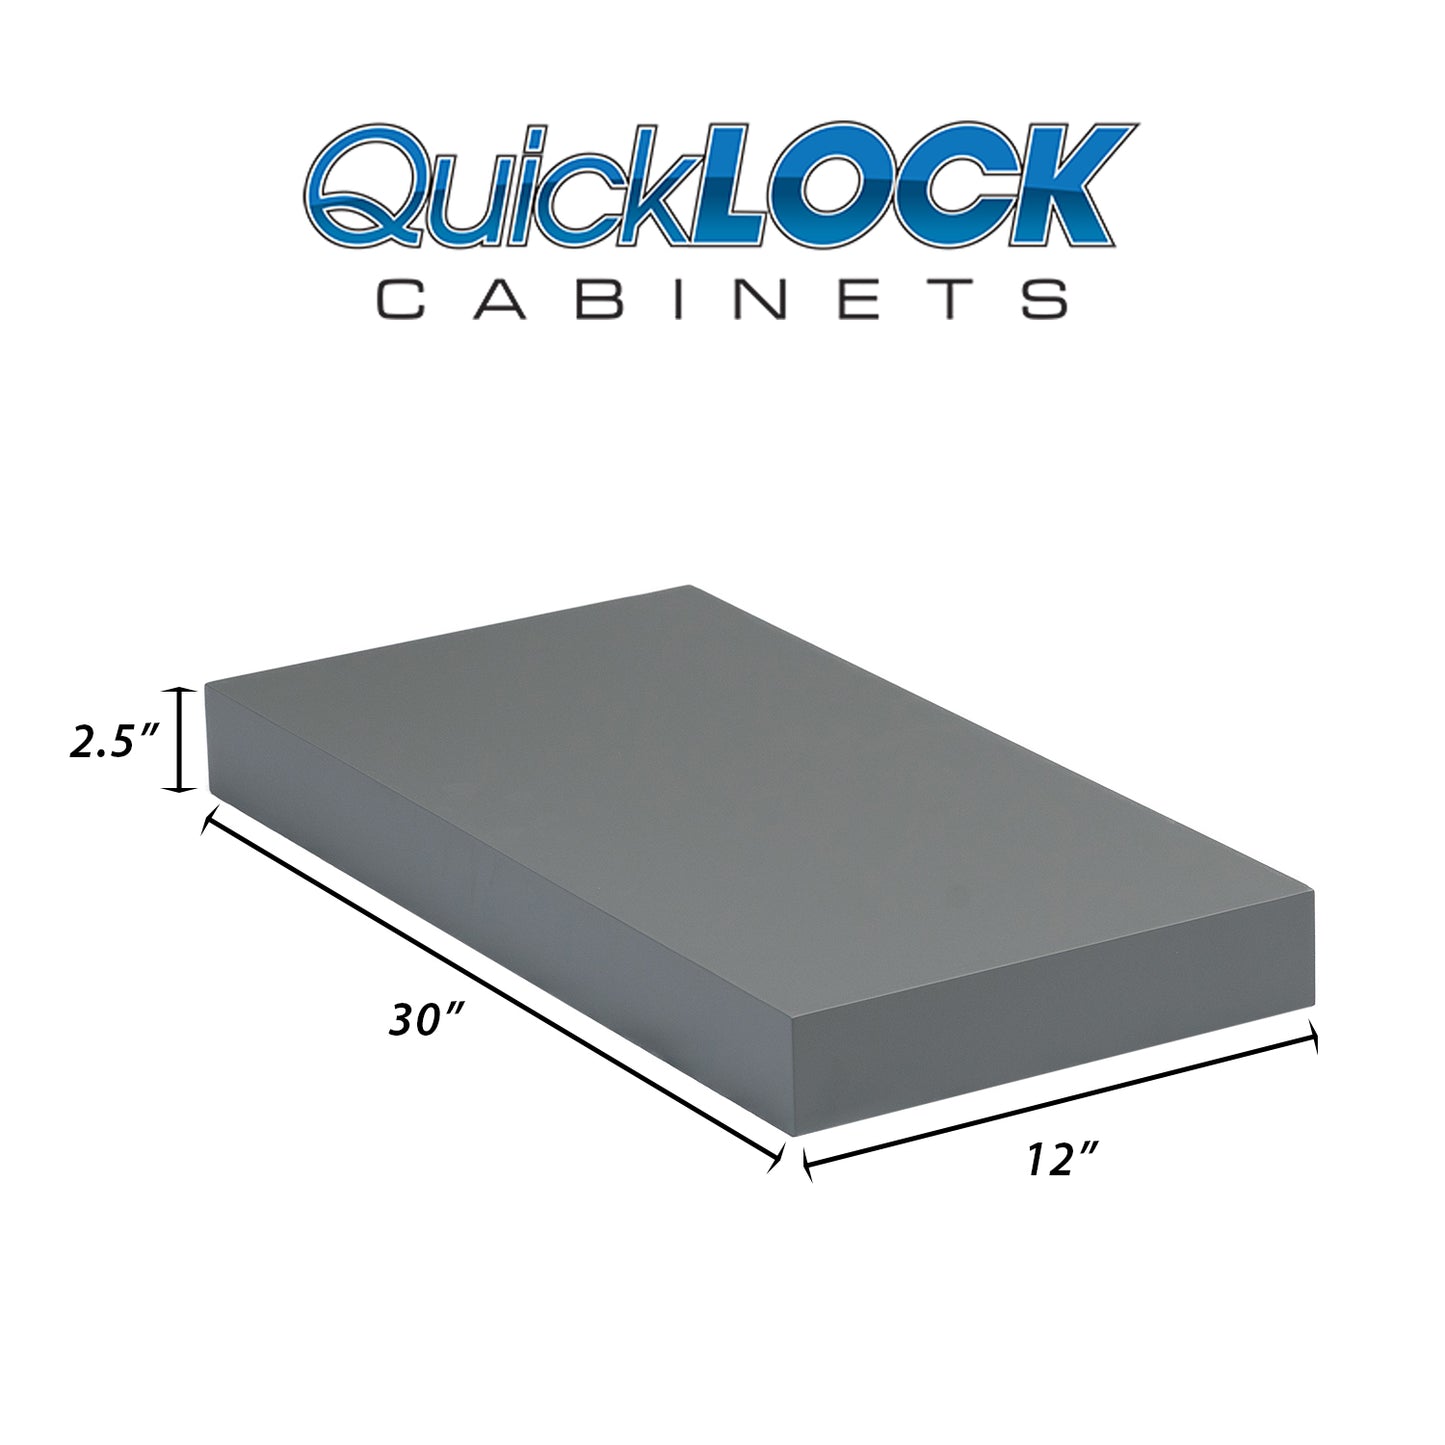 Quicklock Cabinets Floating Shelves | 2.5" Thick | Magnetic Gray, 12" D x 30" W x 2.5" H | American Made | Hardwood Bracket | Complete Shelf Unit